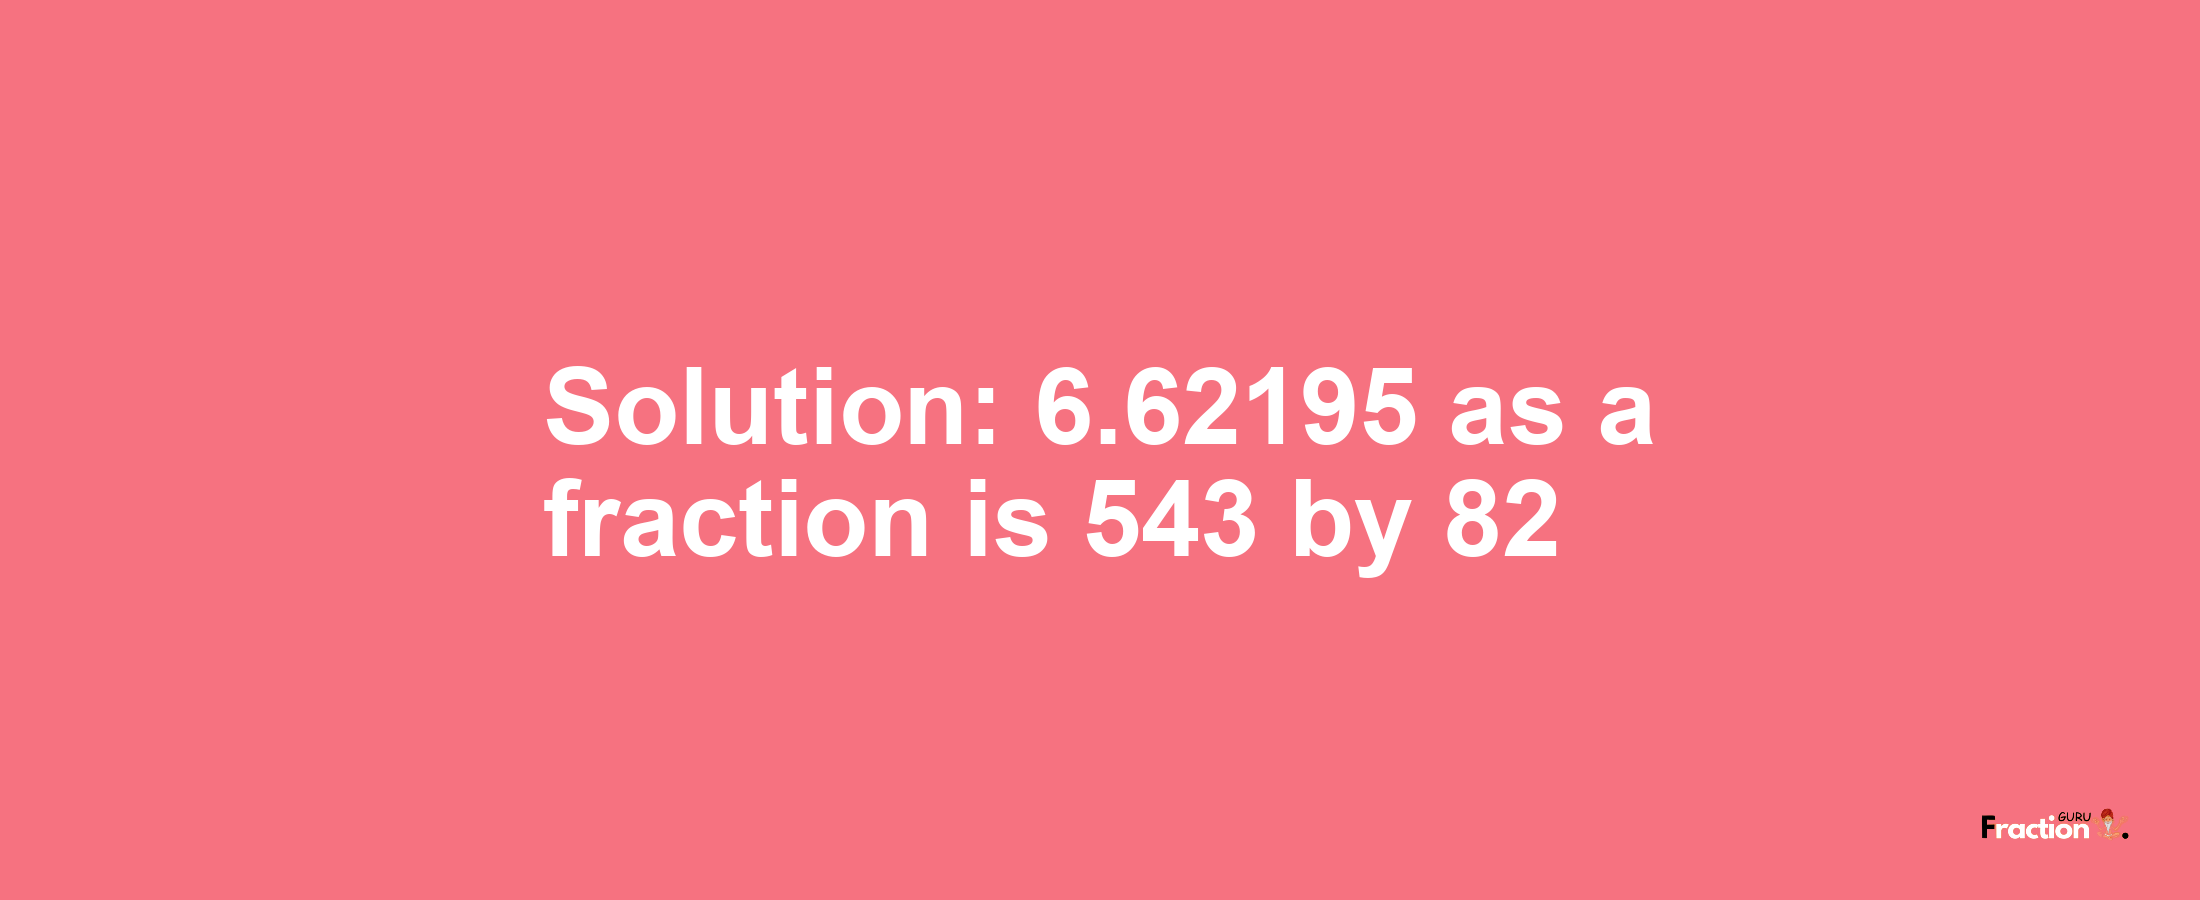 Solution:6.62195 as a fraction is 543/82